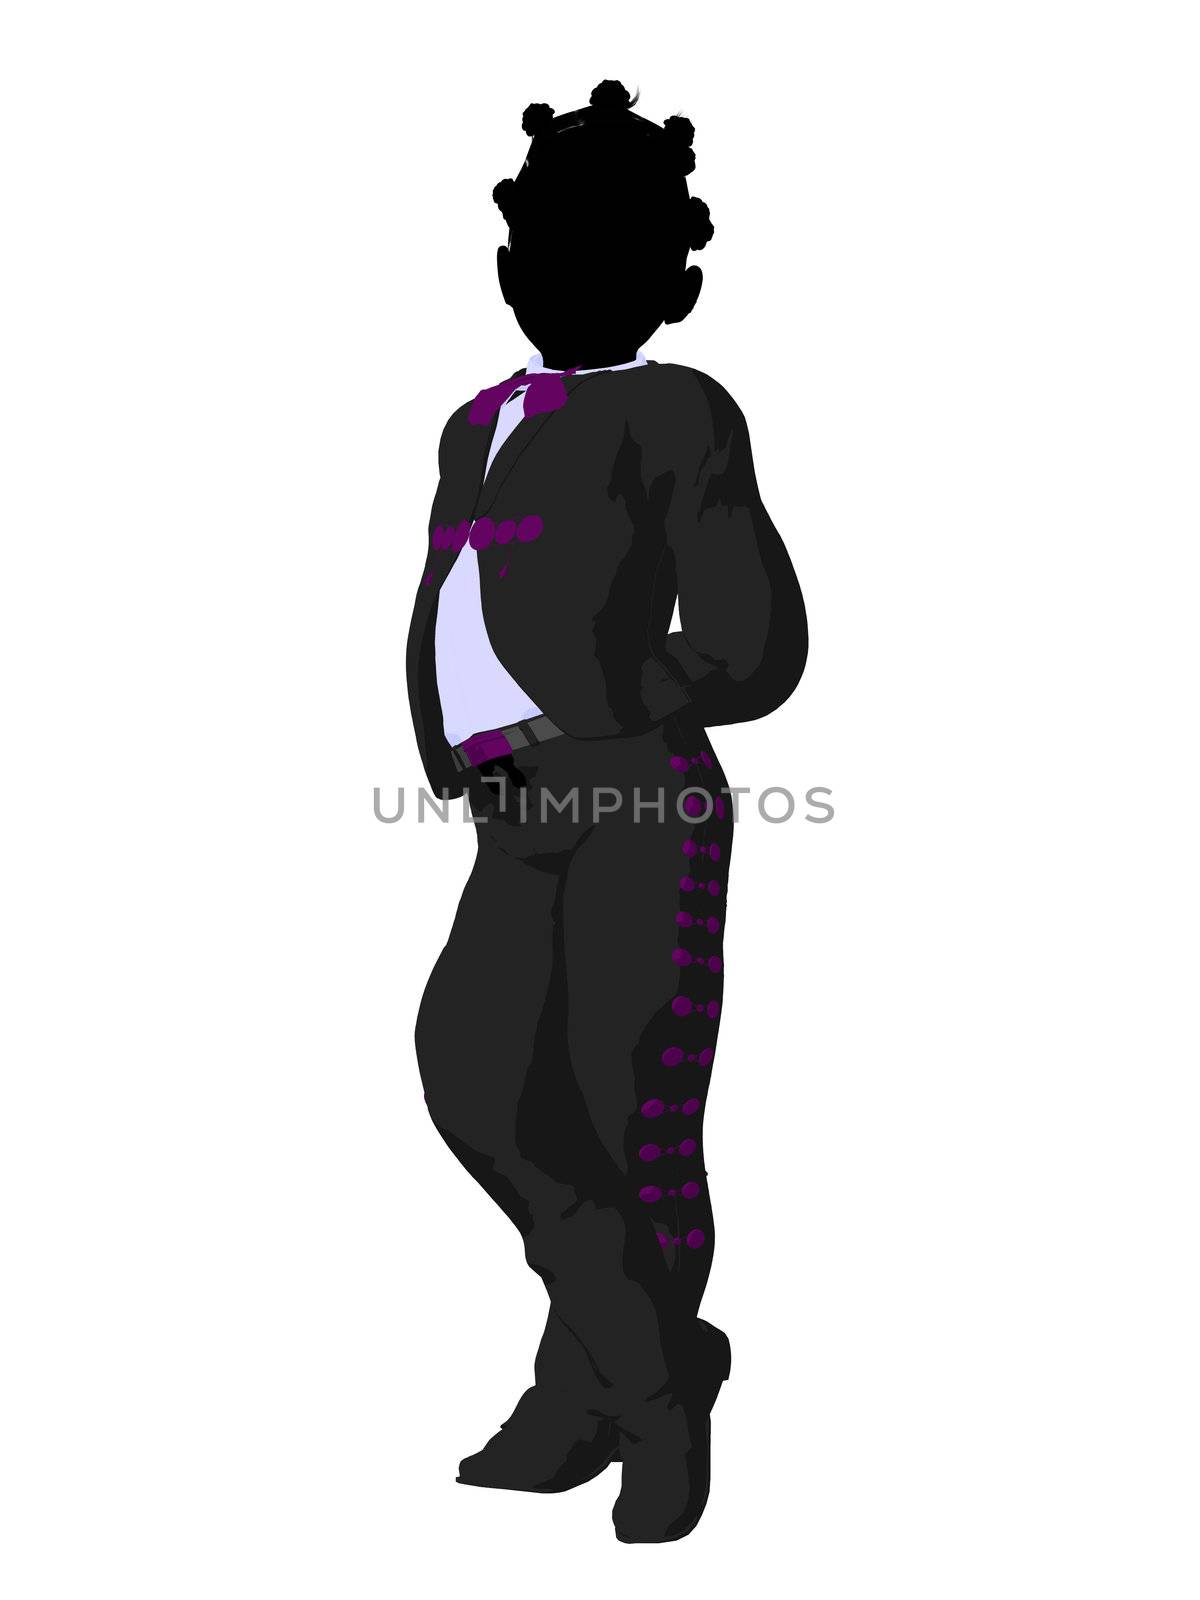 African american girl mariachi illustration silhouette illustration on a white background